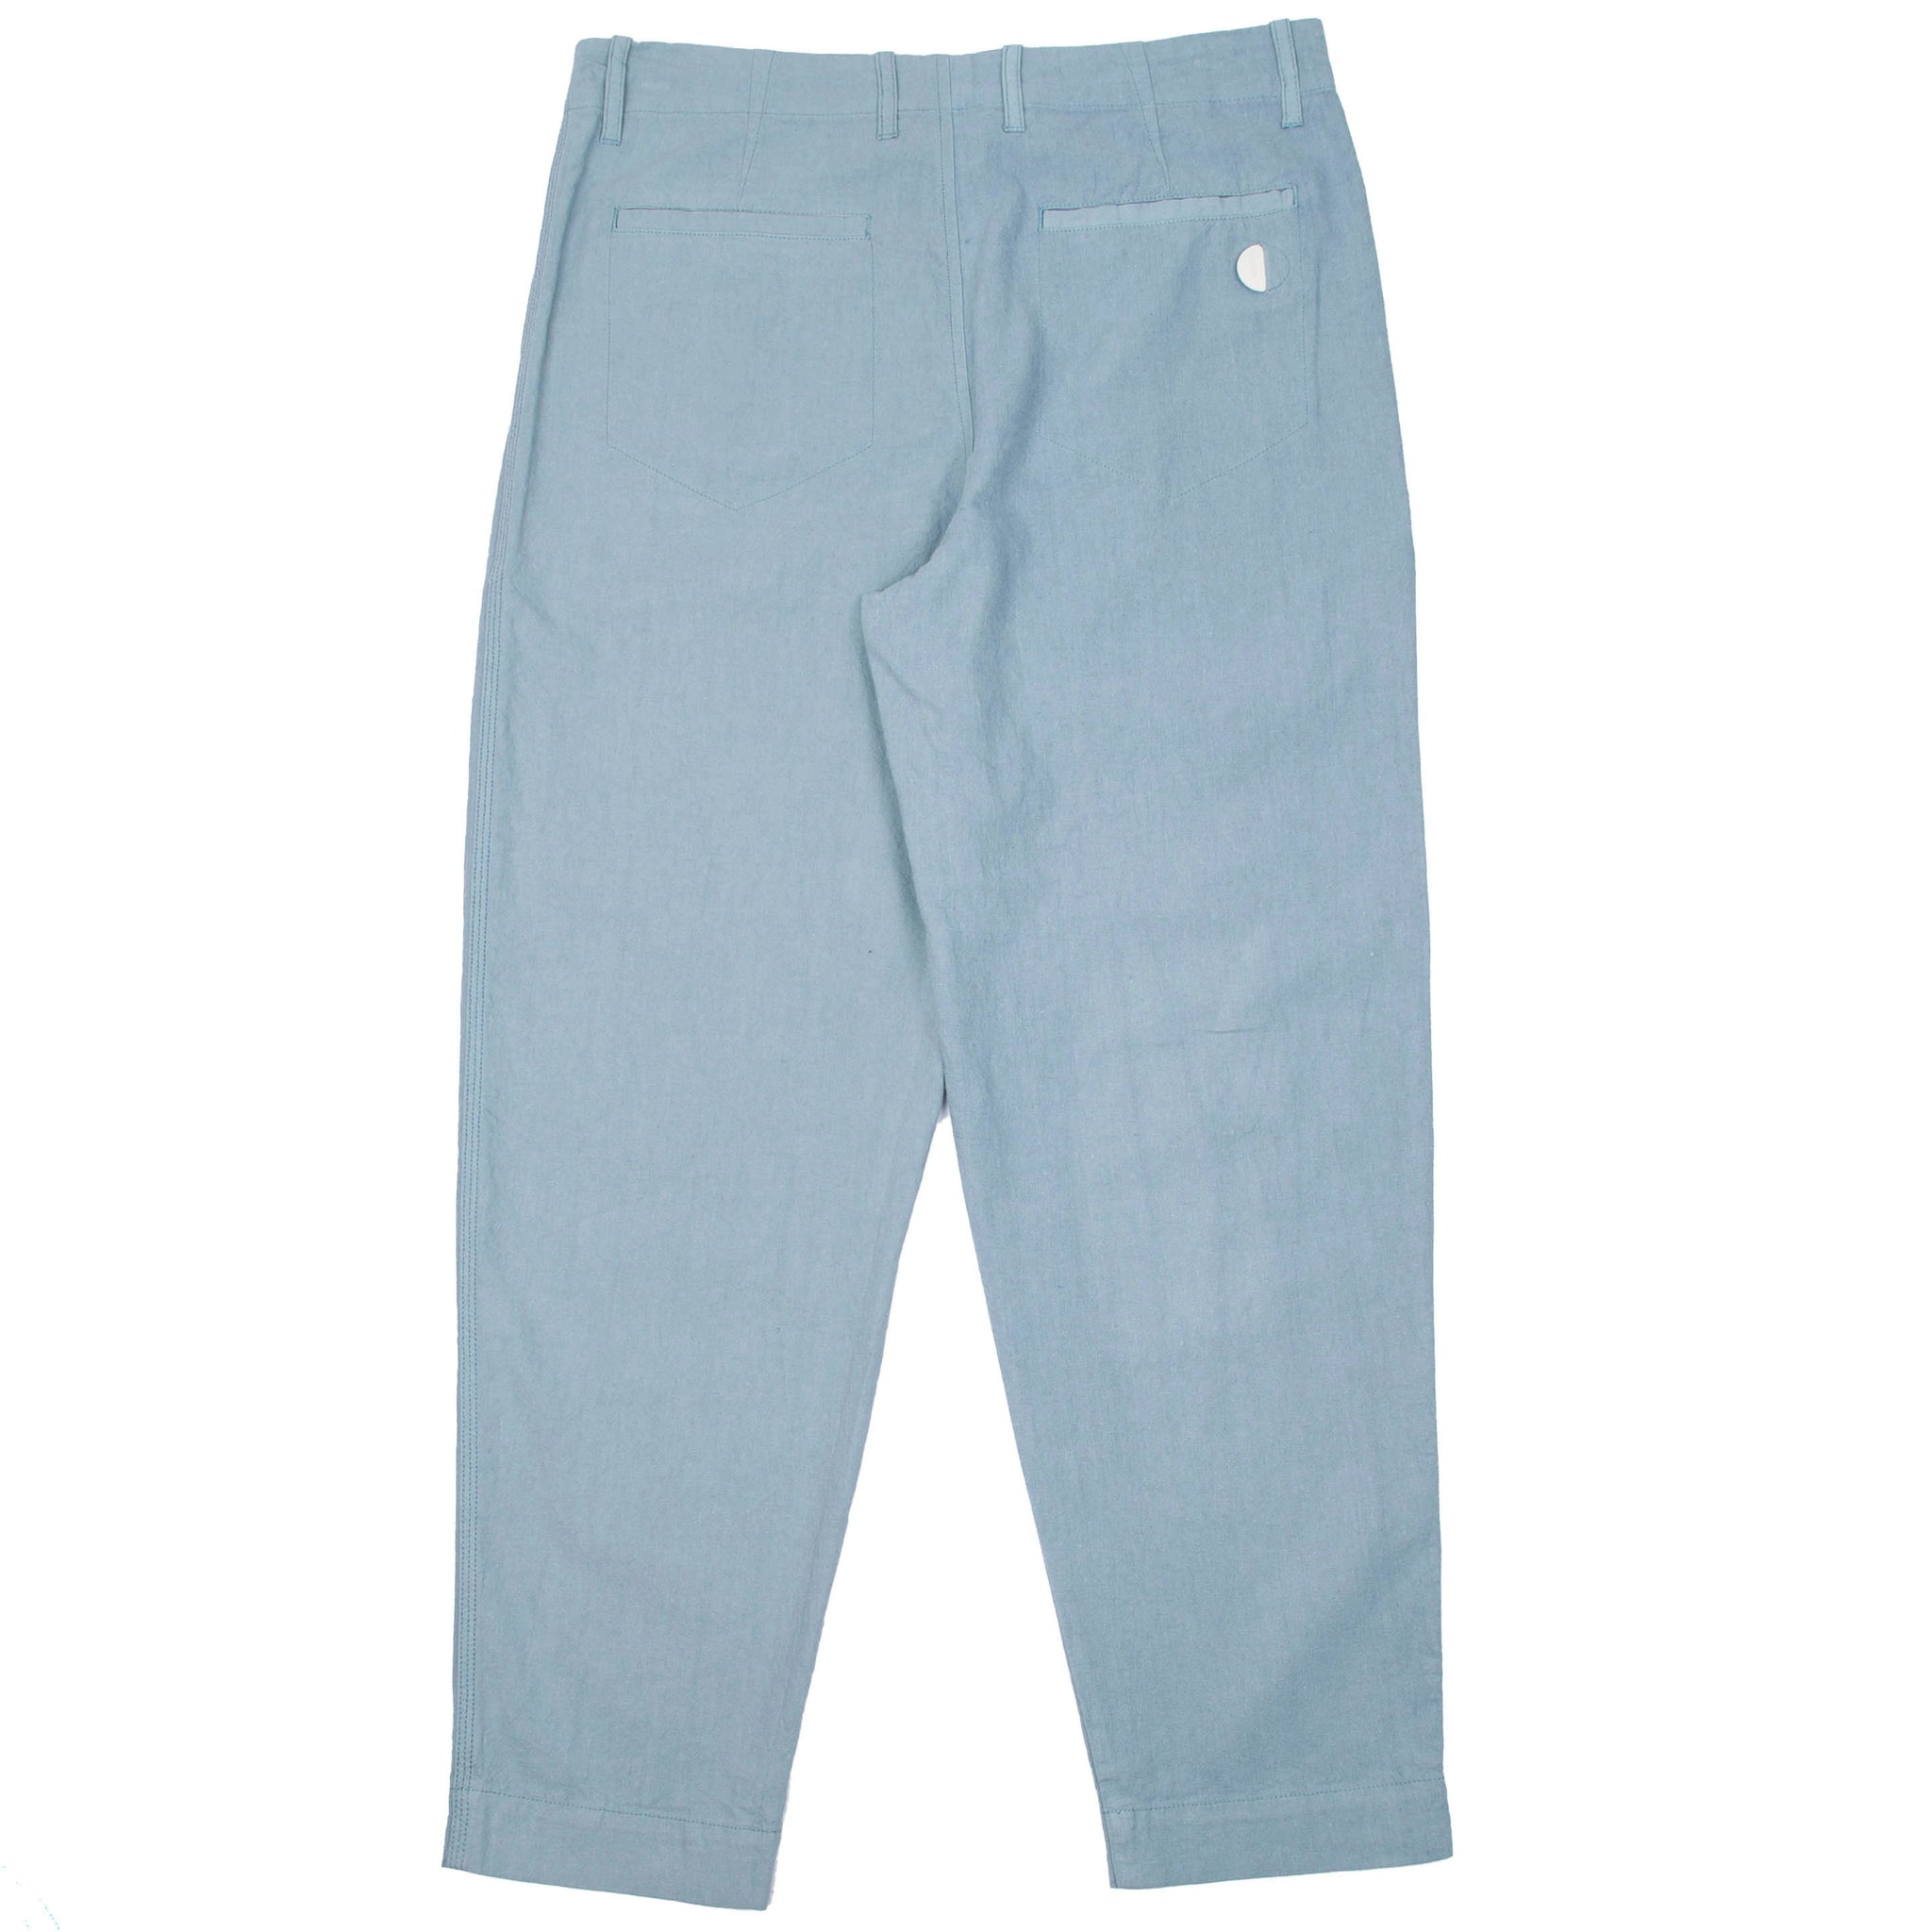 Assembly Pant - Woad Linen